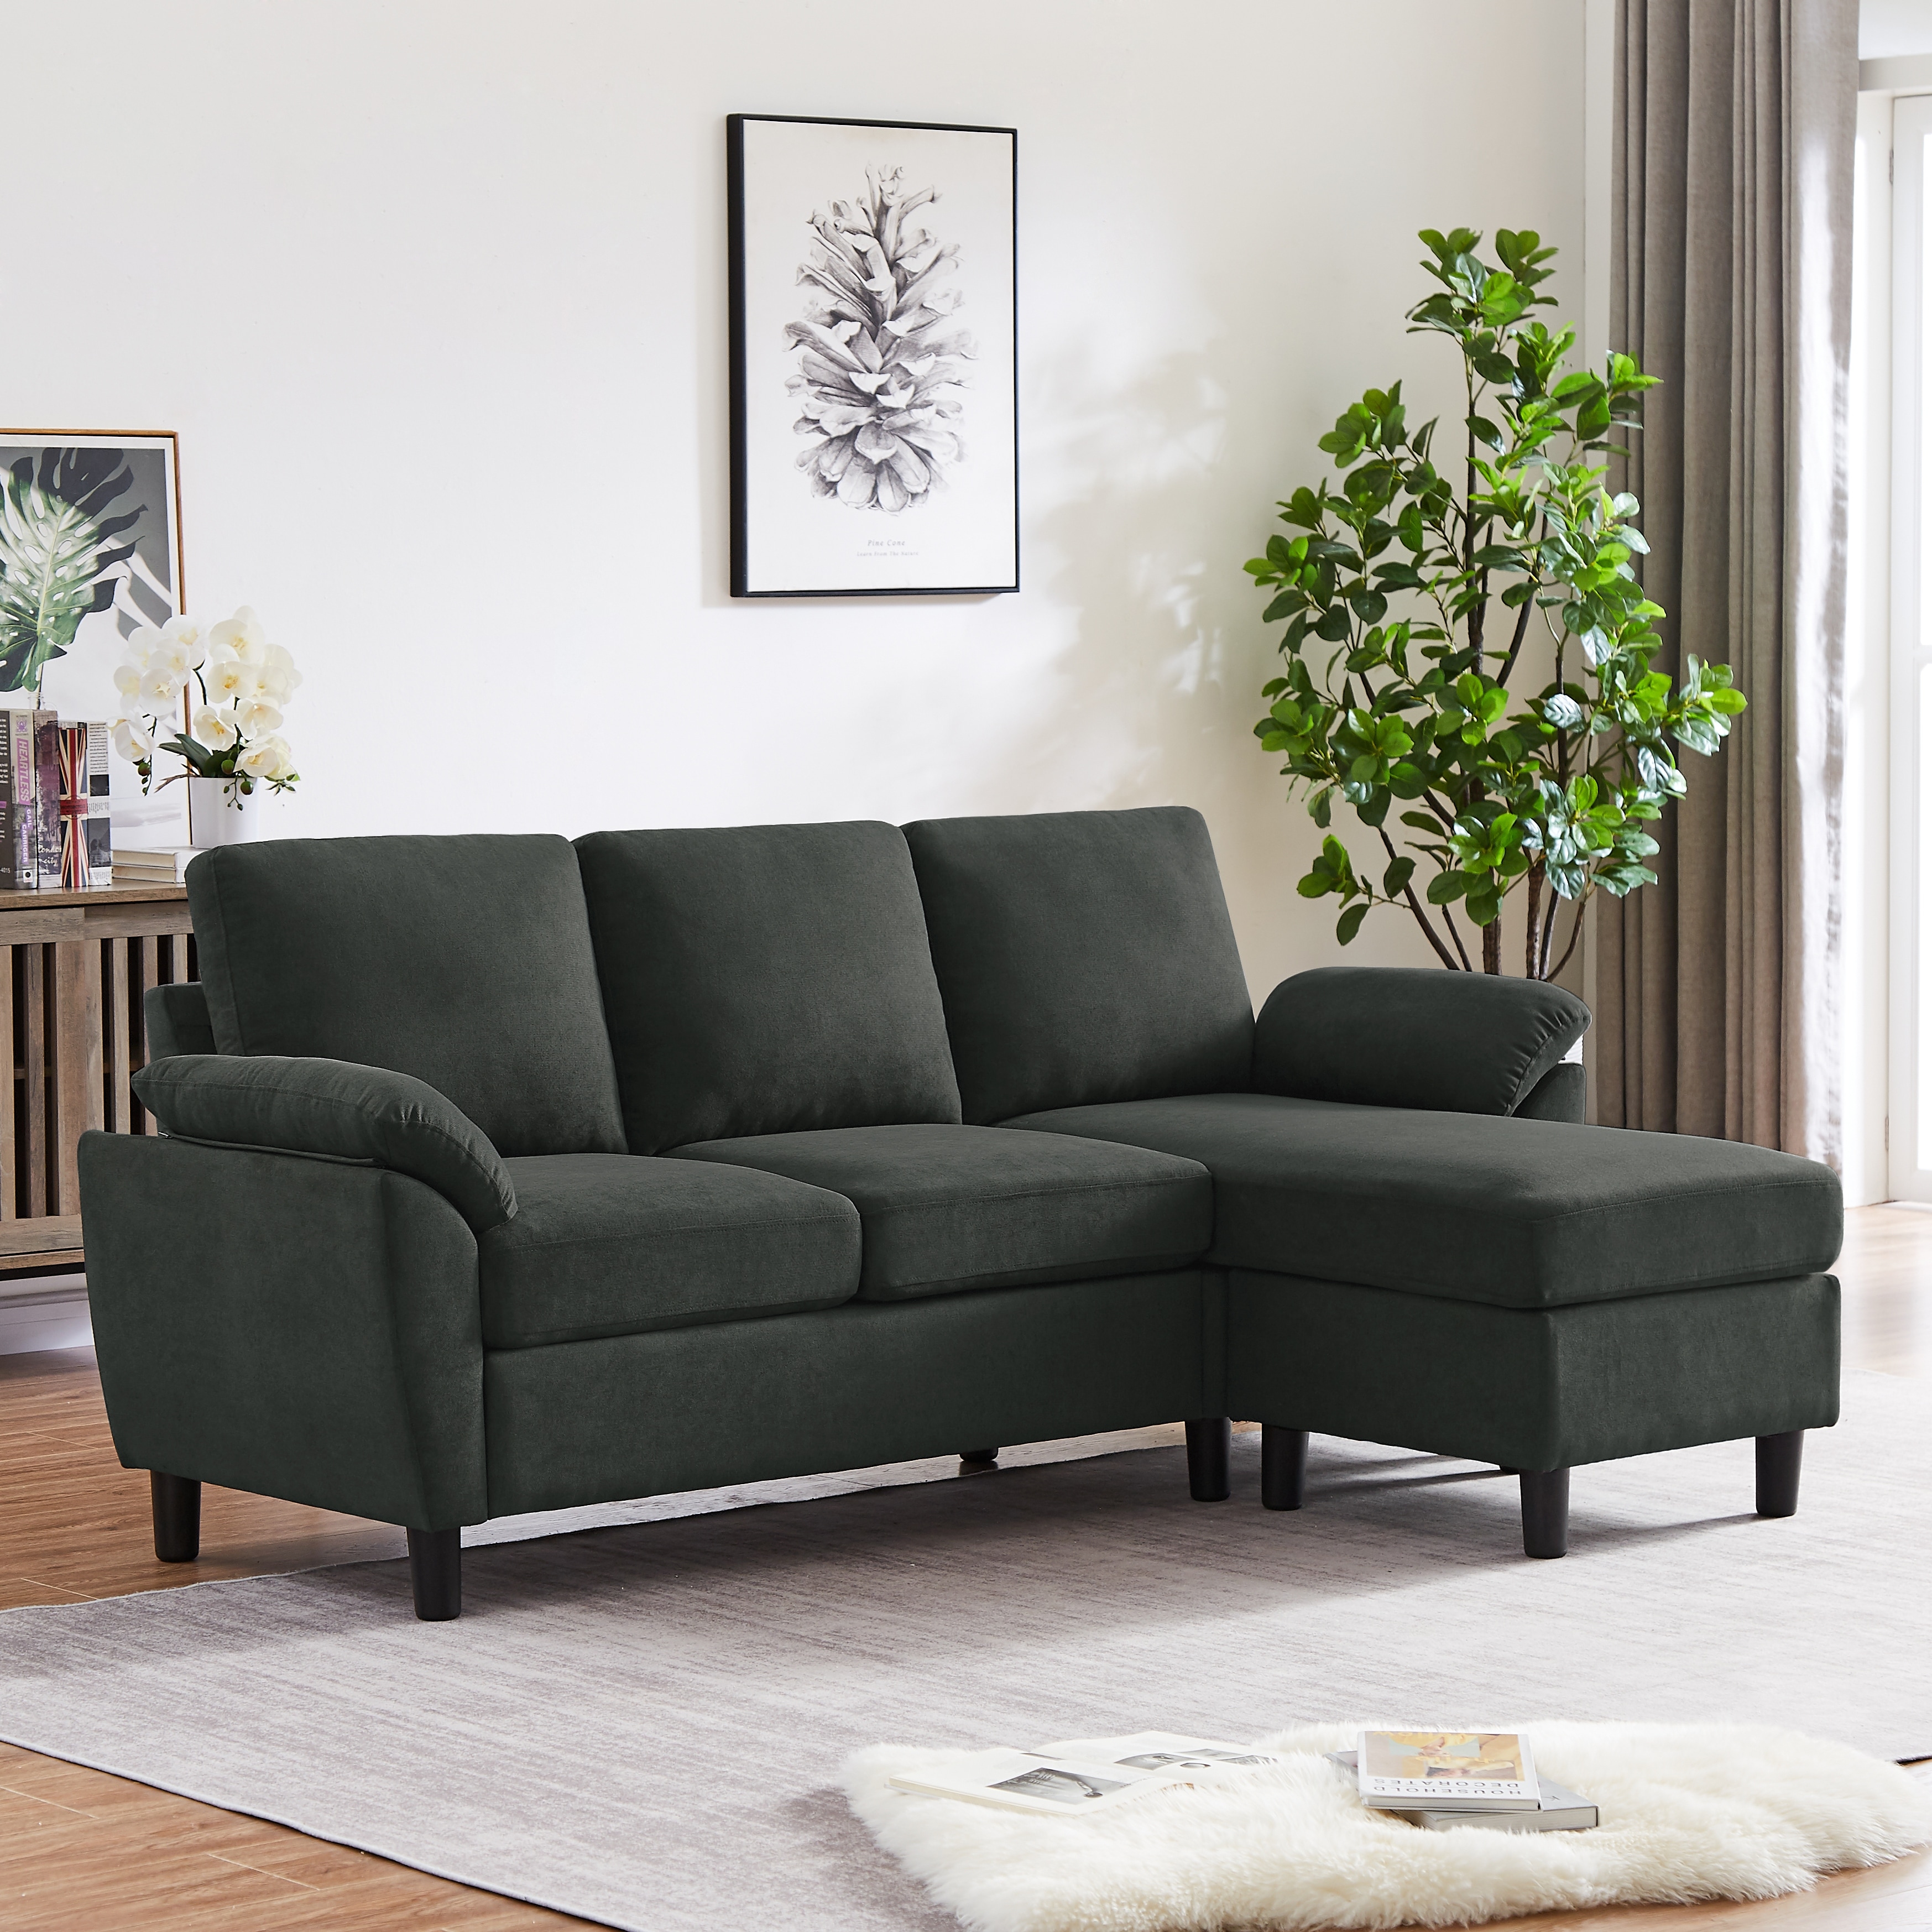 https://ak1.ostkcdn.com/images/products/is/images/direct/b03434dc6ebff5a960ea4a4794109eee0da4468a/Modern-Sectional-Sofa-Couch-L-Shaped-with-Removable-Armrest%2C-Convertible-Couch-with-Reversible-Ottoman-for-Living-Room.jpg